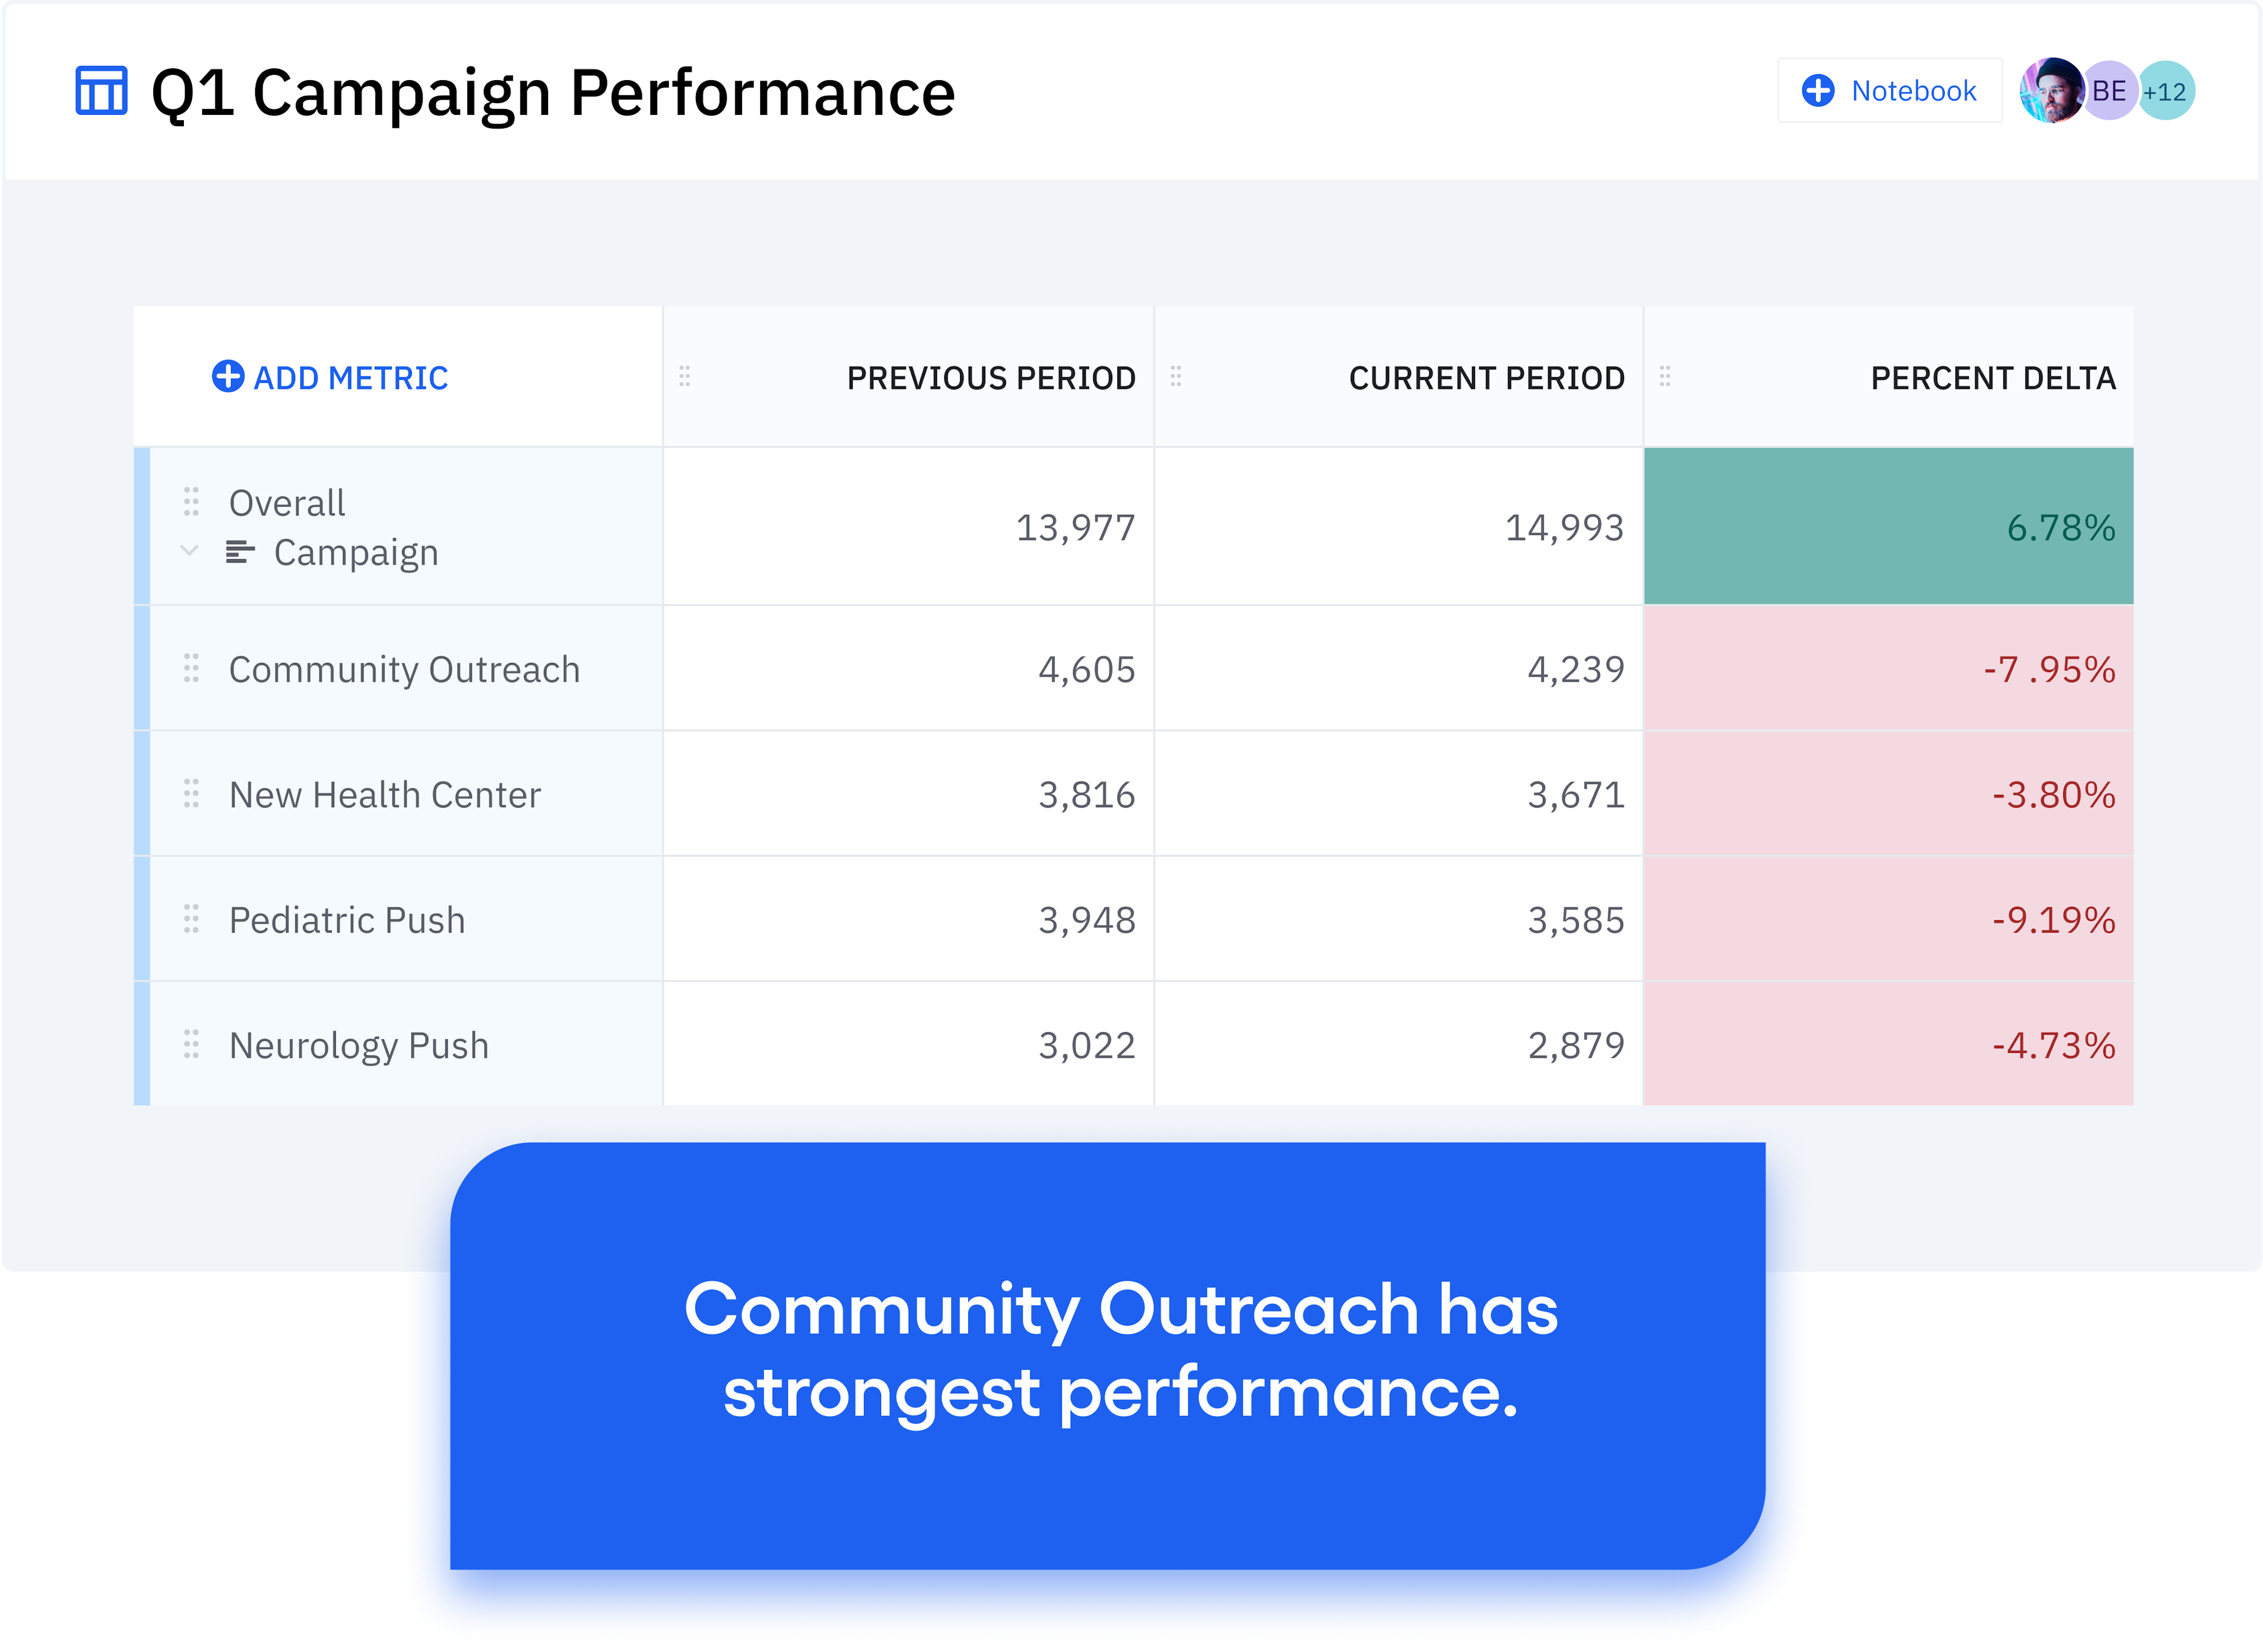 Gain a high-level view of marketing campaign performance in seconds